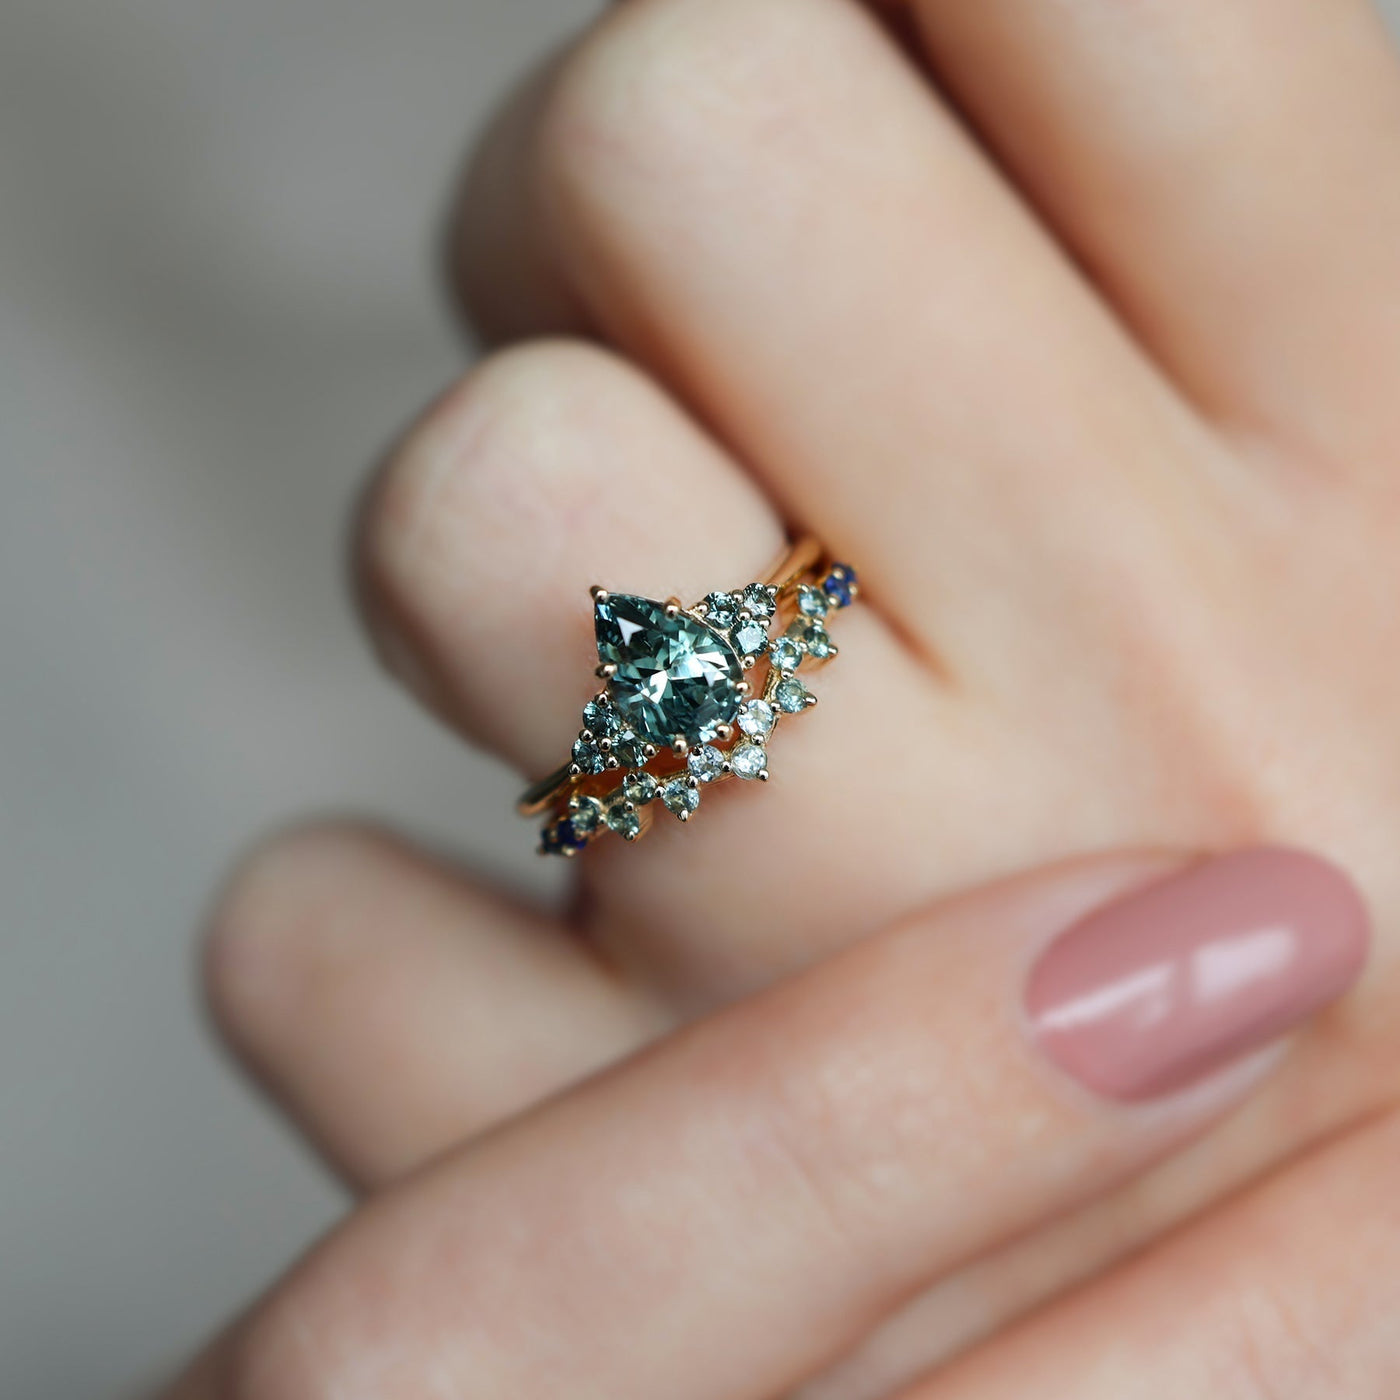 Pear-shaped teal sapphire cluster ring with curved sapphire band and diamonds